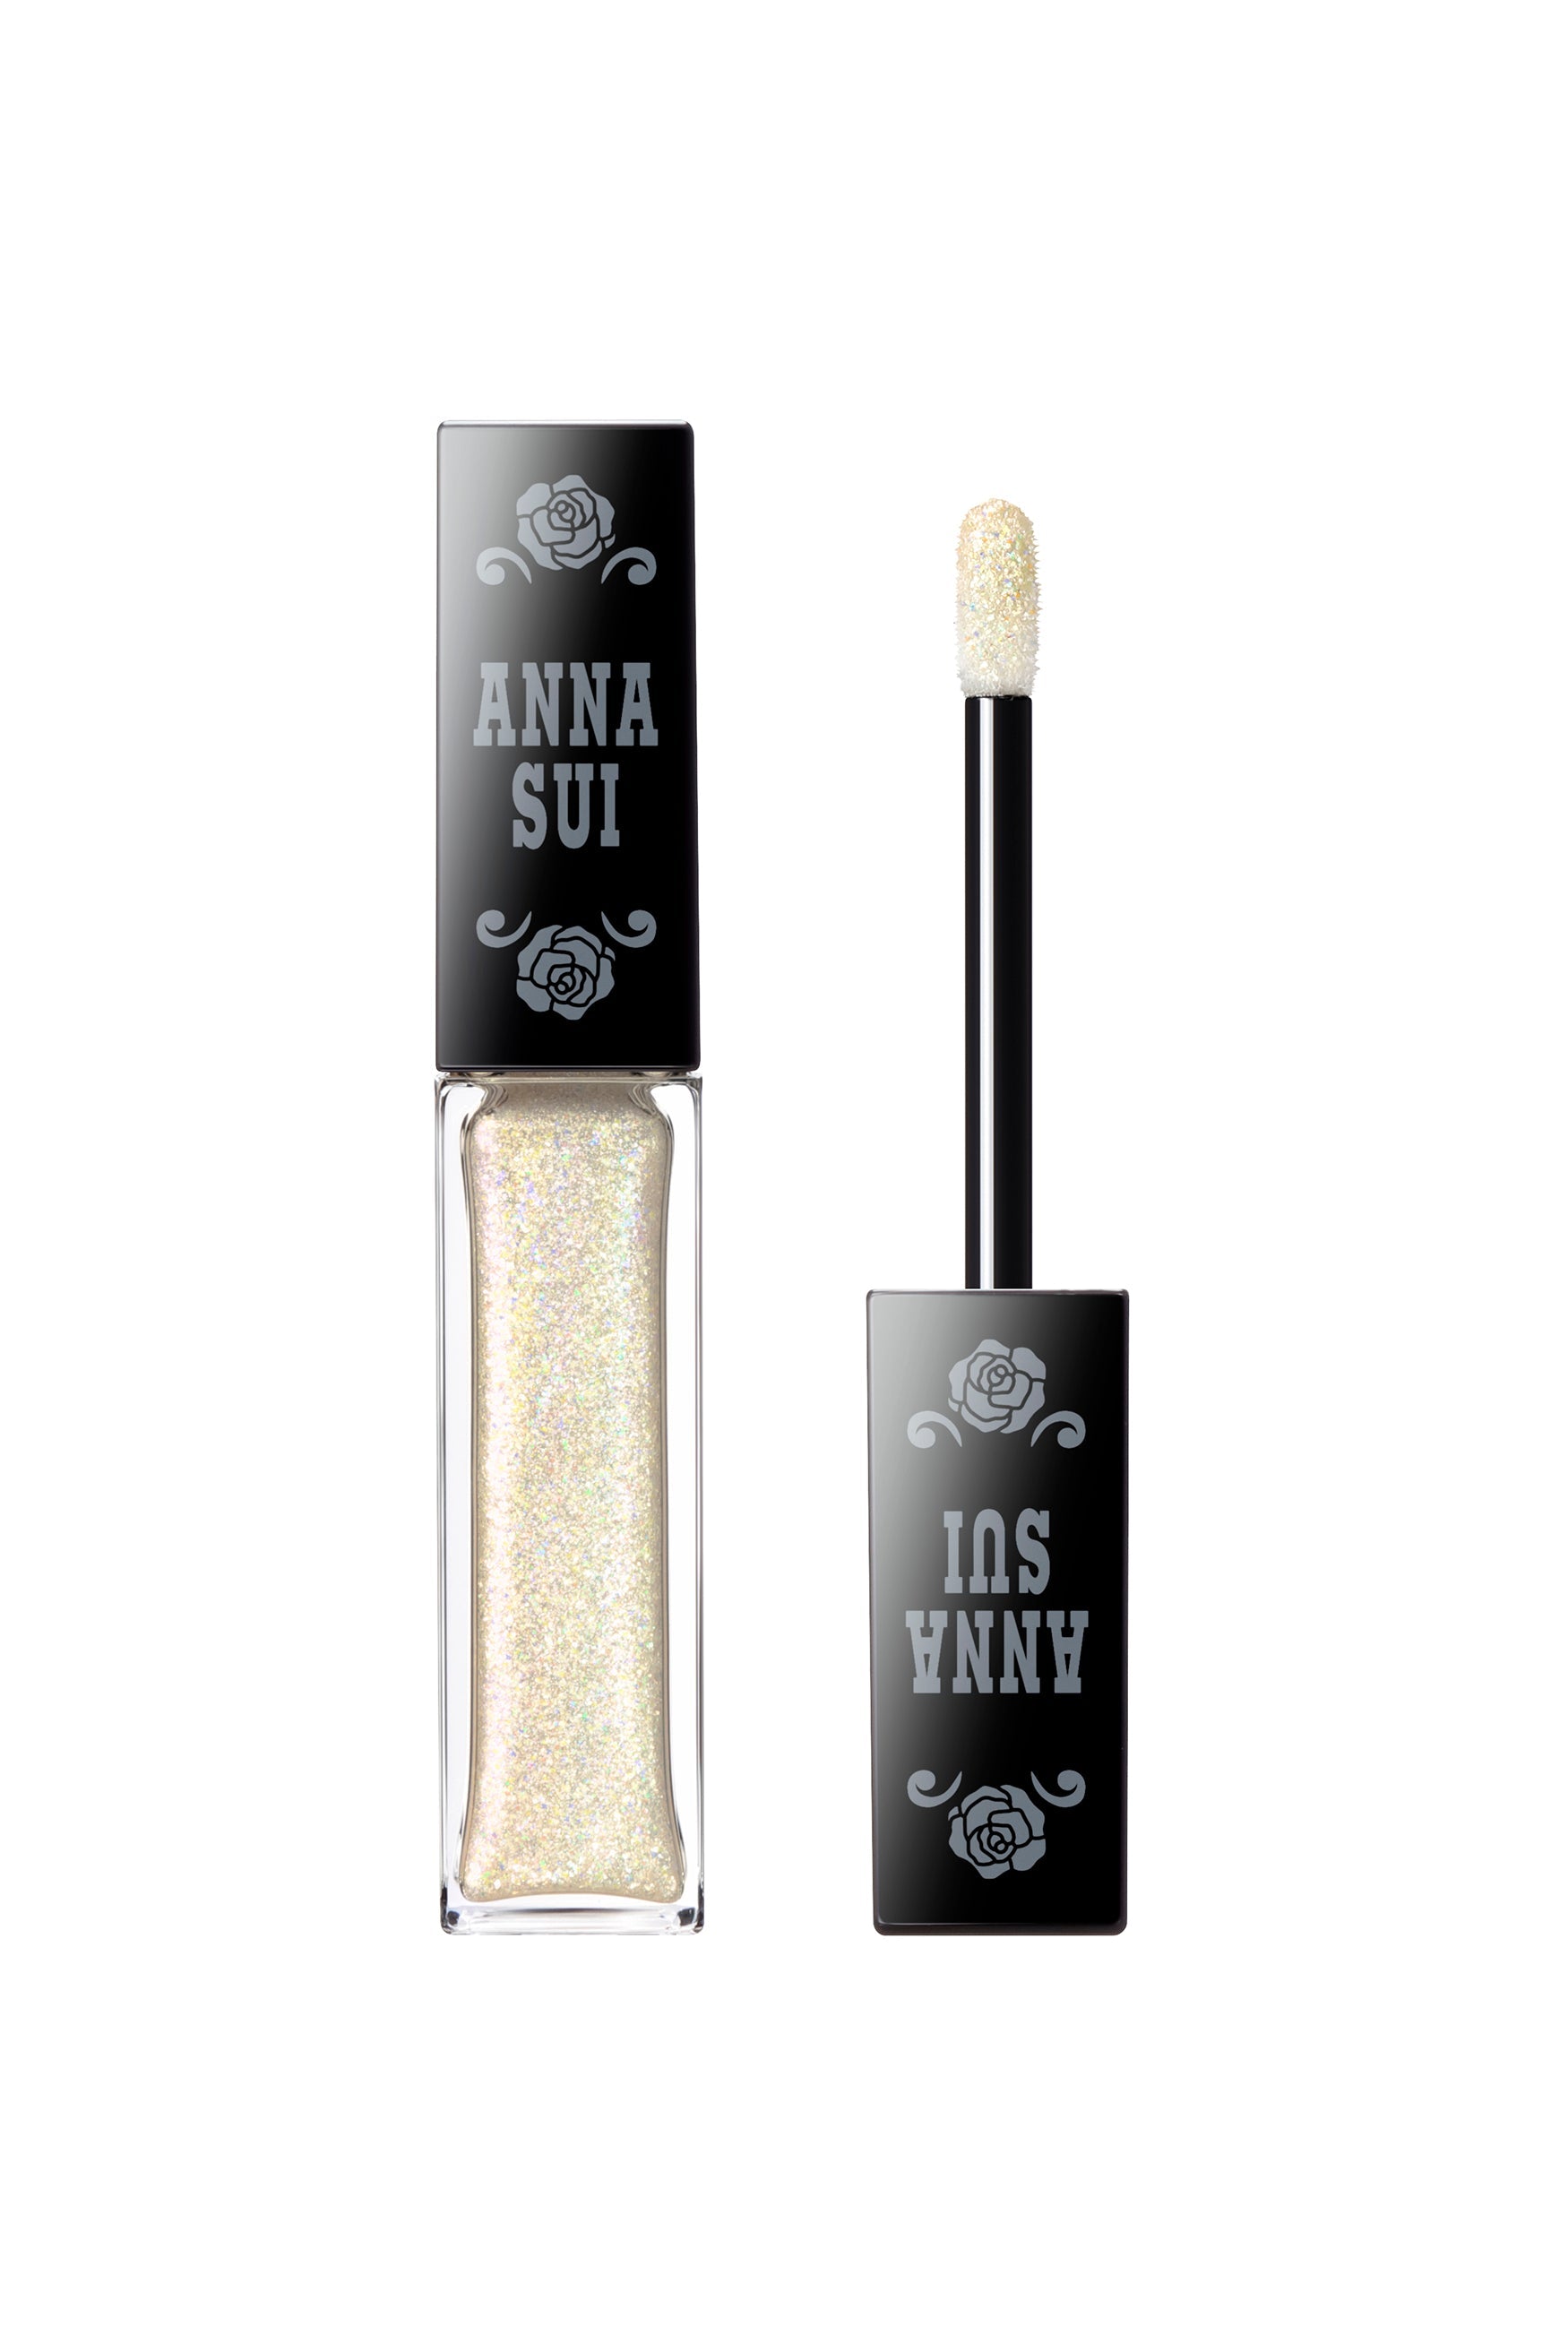 PEARLESCENT WHITE is formulated to maximize the quality of the glitter for instant luminance upon application